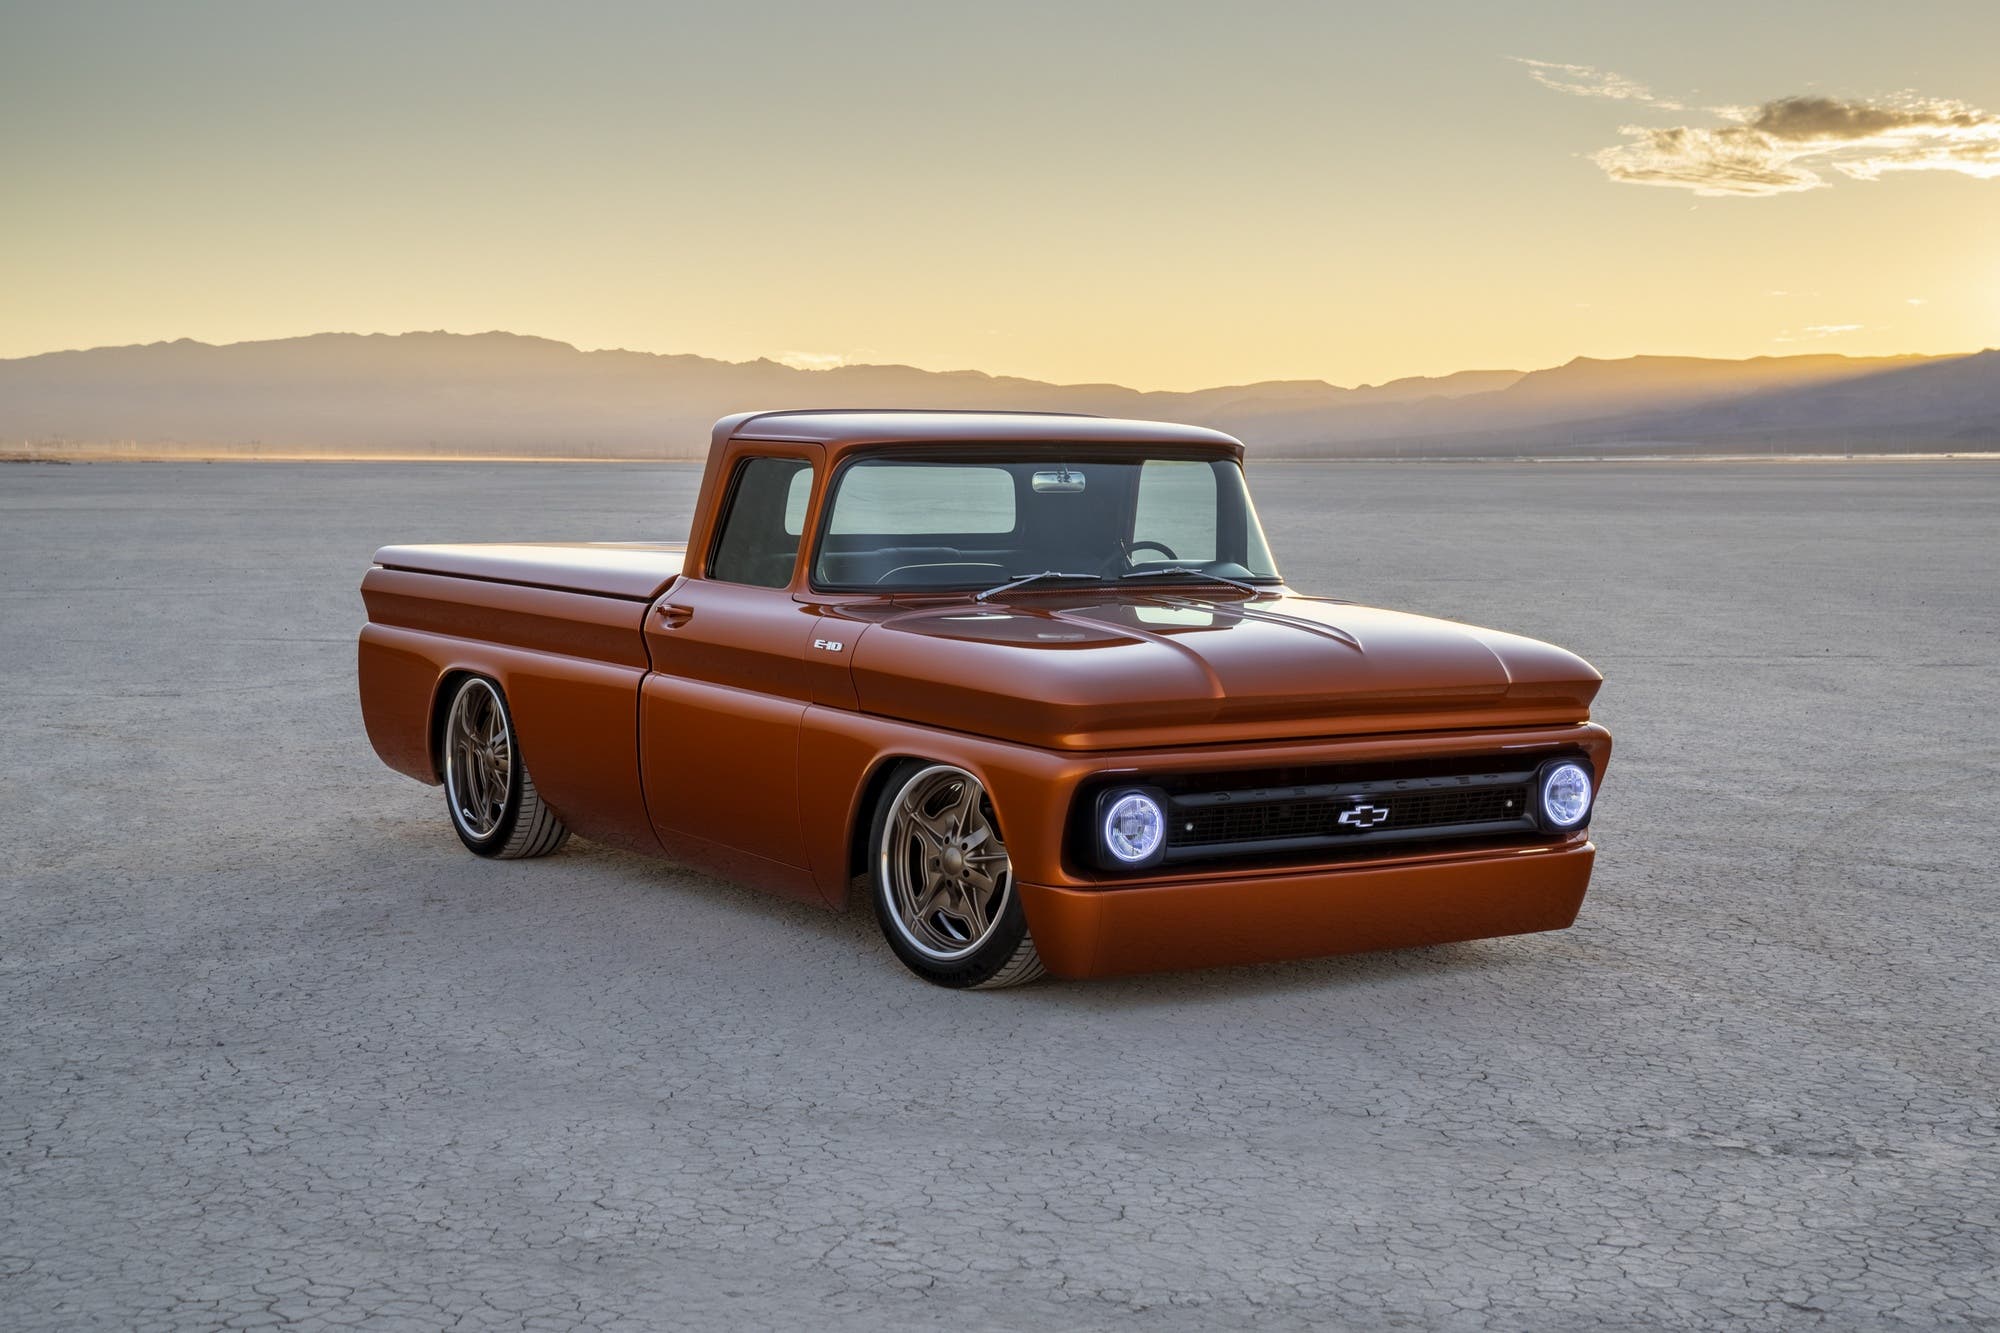 Classic and electric: this is the retro Chevrolet truck equipped with the latest technology